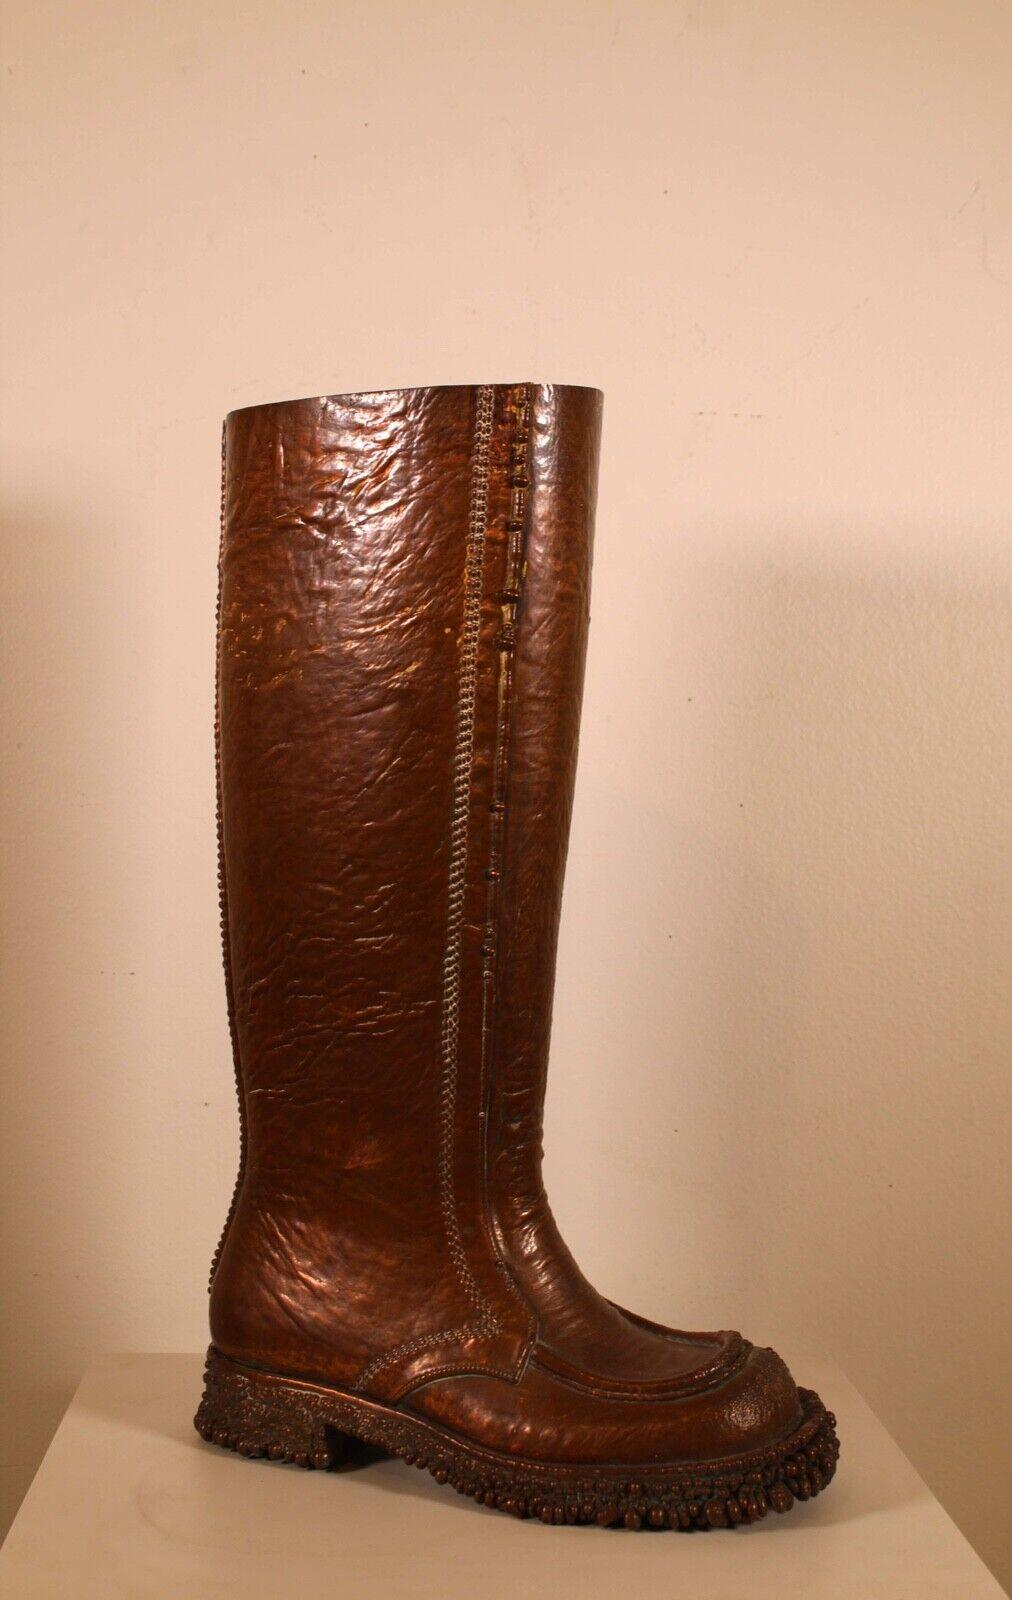 This unique bronzed casted boot up for consideration. Can be used as an umbrella or cane holder. In very good condition. Dimensions: 4